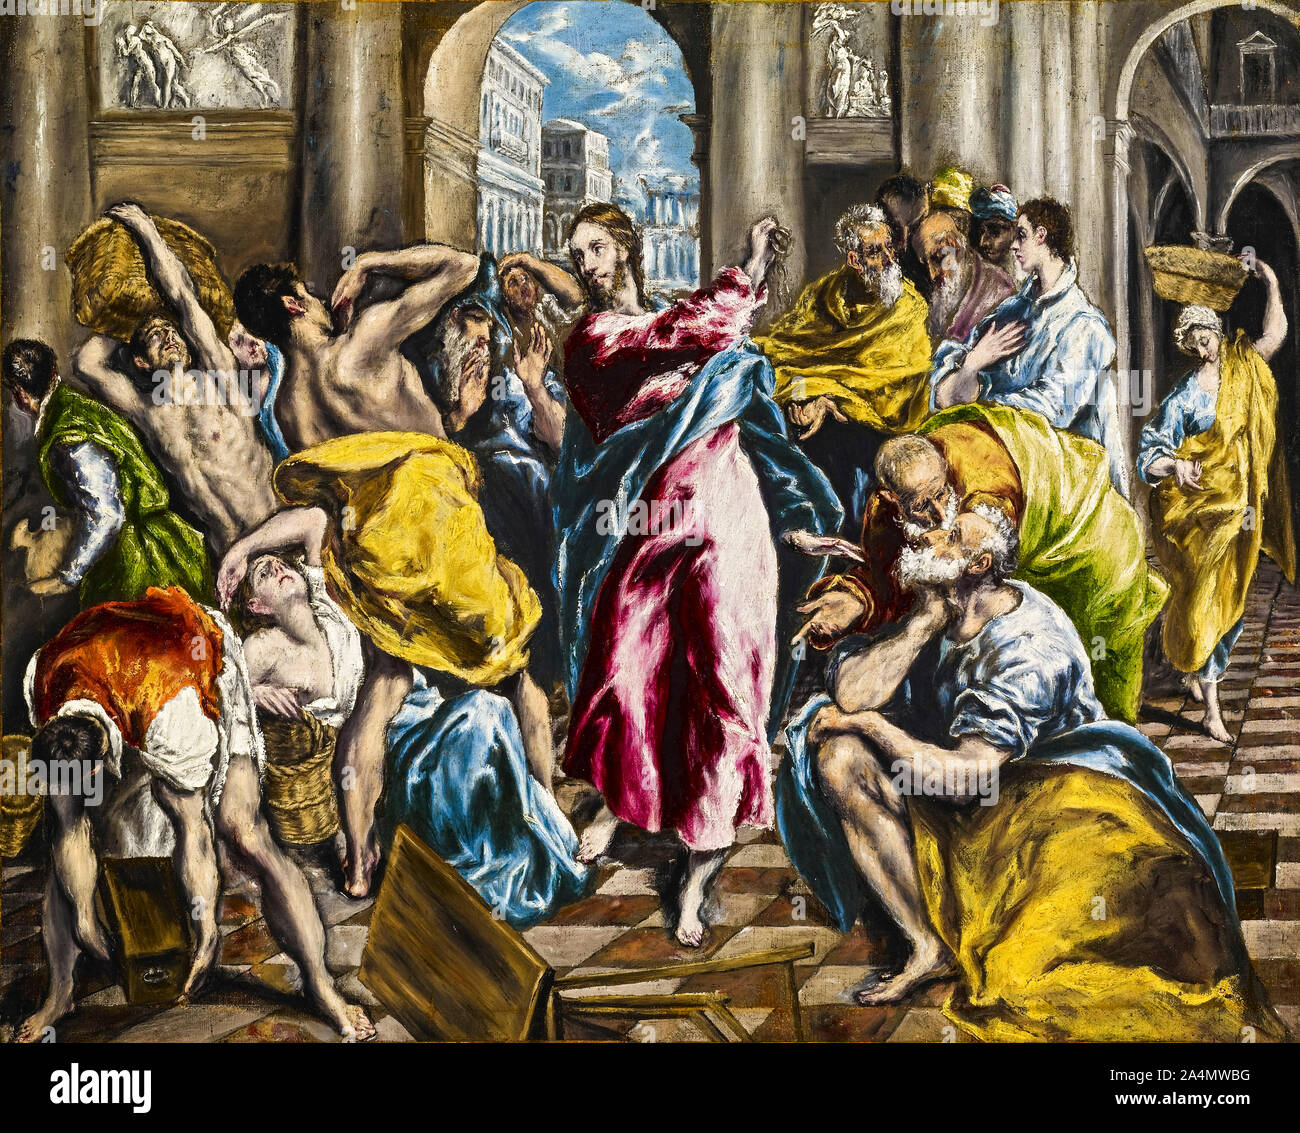 El Greco, Purification of the Temple, painting, circa 1600 Stock Photo